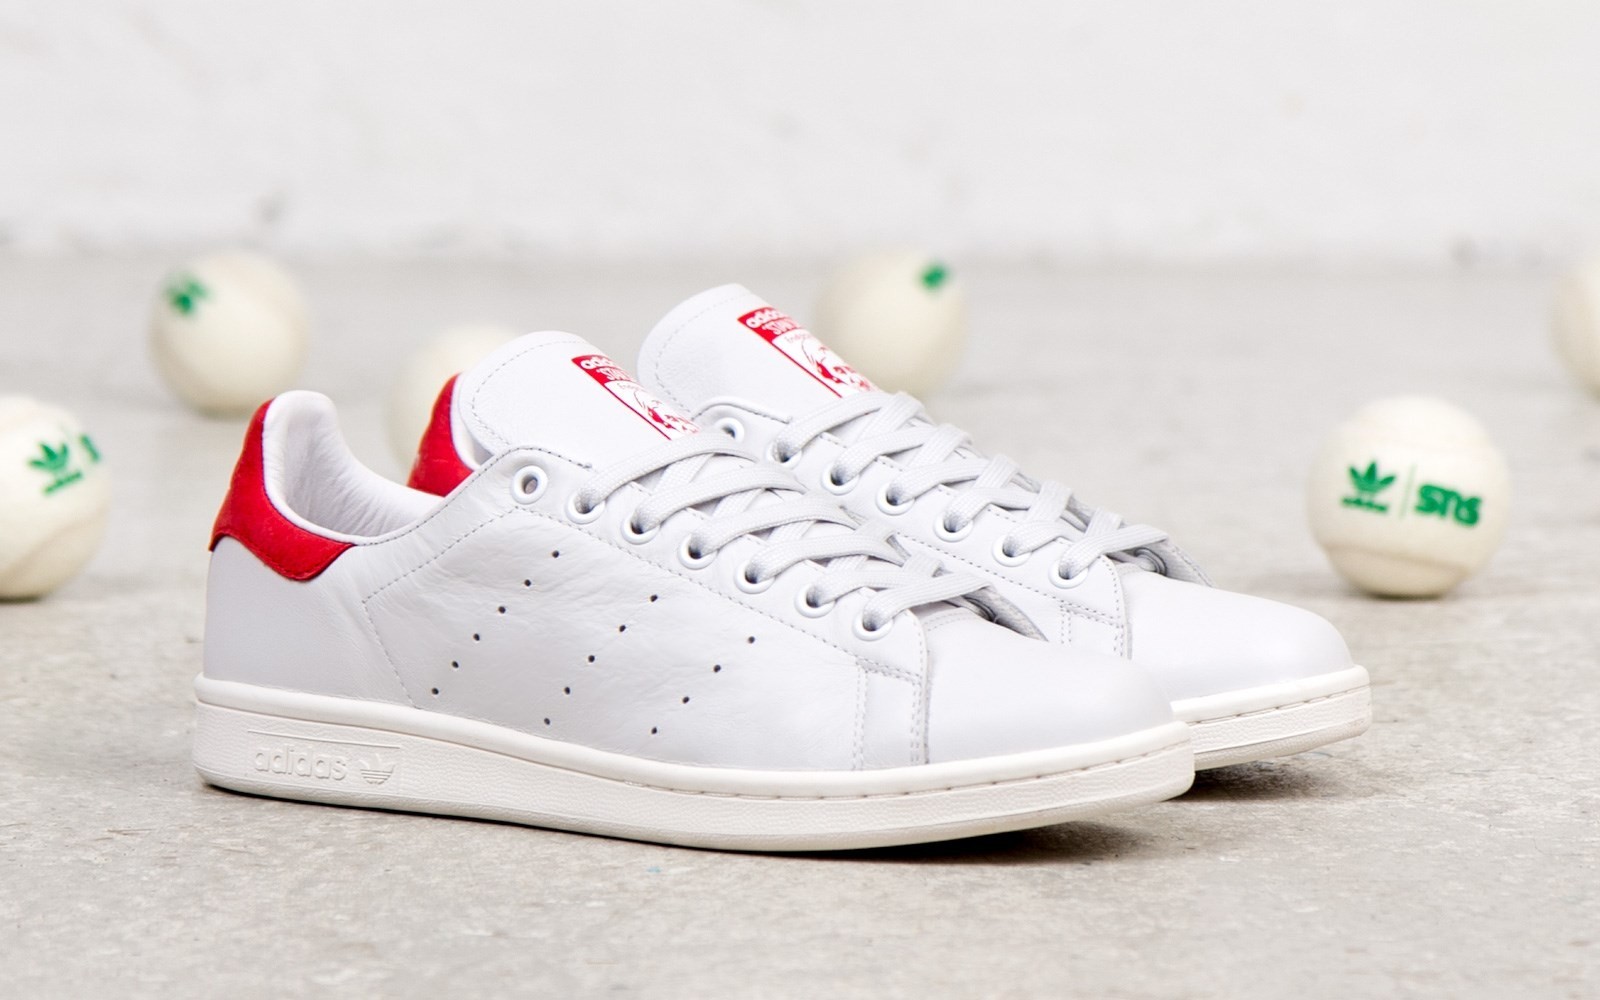 stan smith pas cher rouge